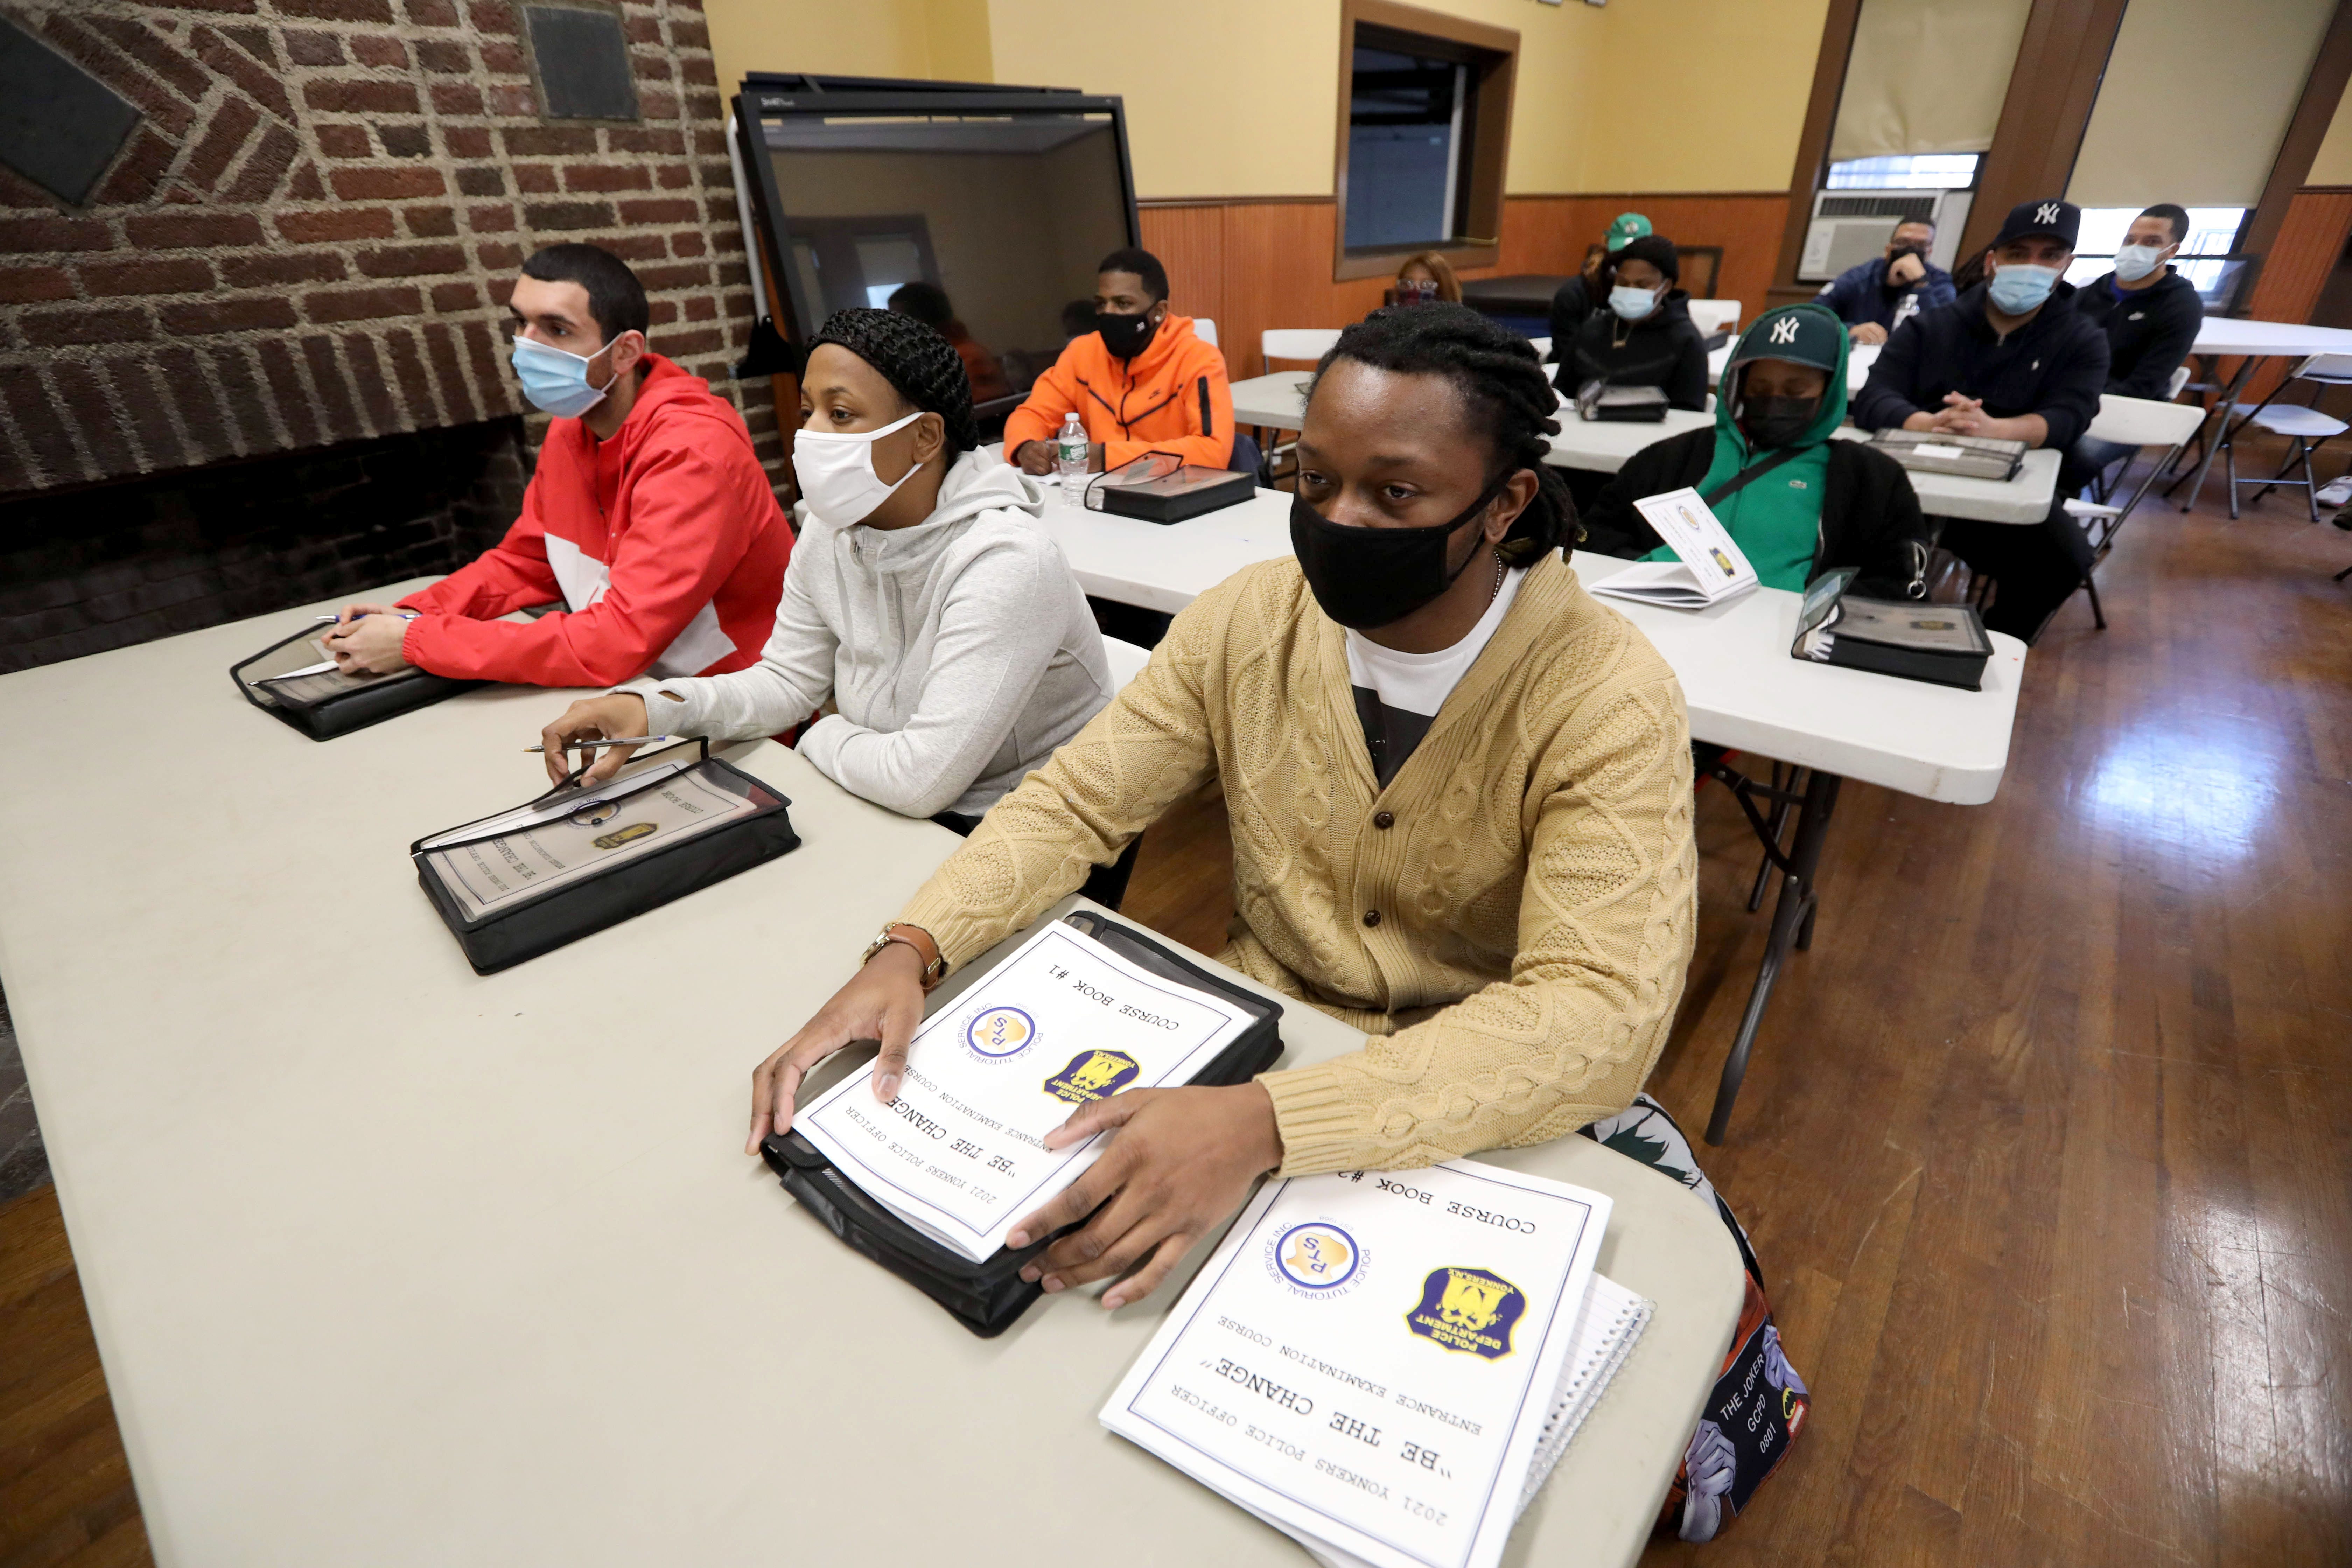 Tim Blue, 20, was among several dozen young people at the Yonkers Police Athletic League who were taking a class to help train them to take the civil service police exam April 21, 2021. Class participants, all who hope to become members of the Yonkers Police Department, must score at achieve a 90% grade on the exam, which is given every four years. This year's exam will be given in September. 